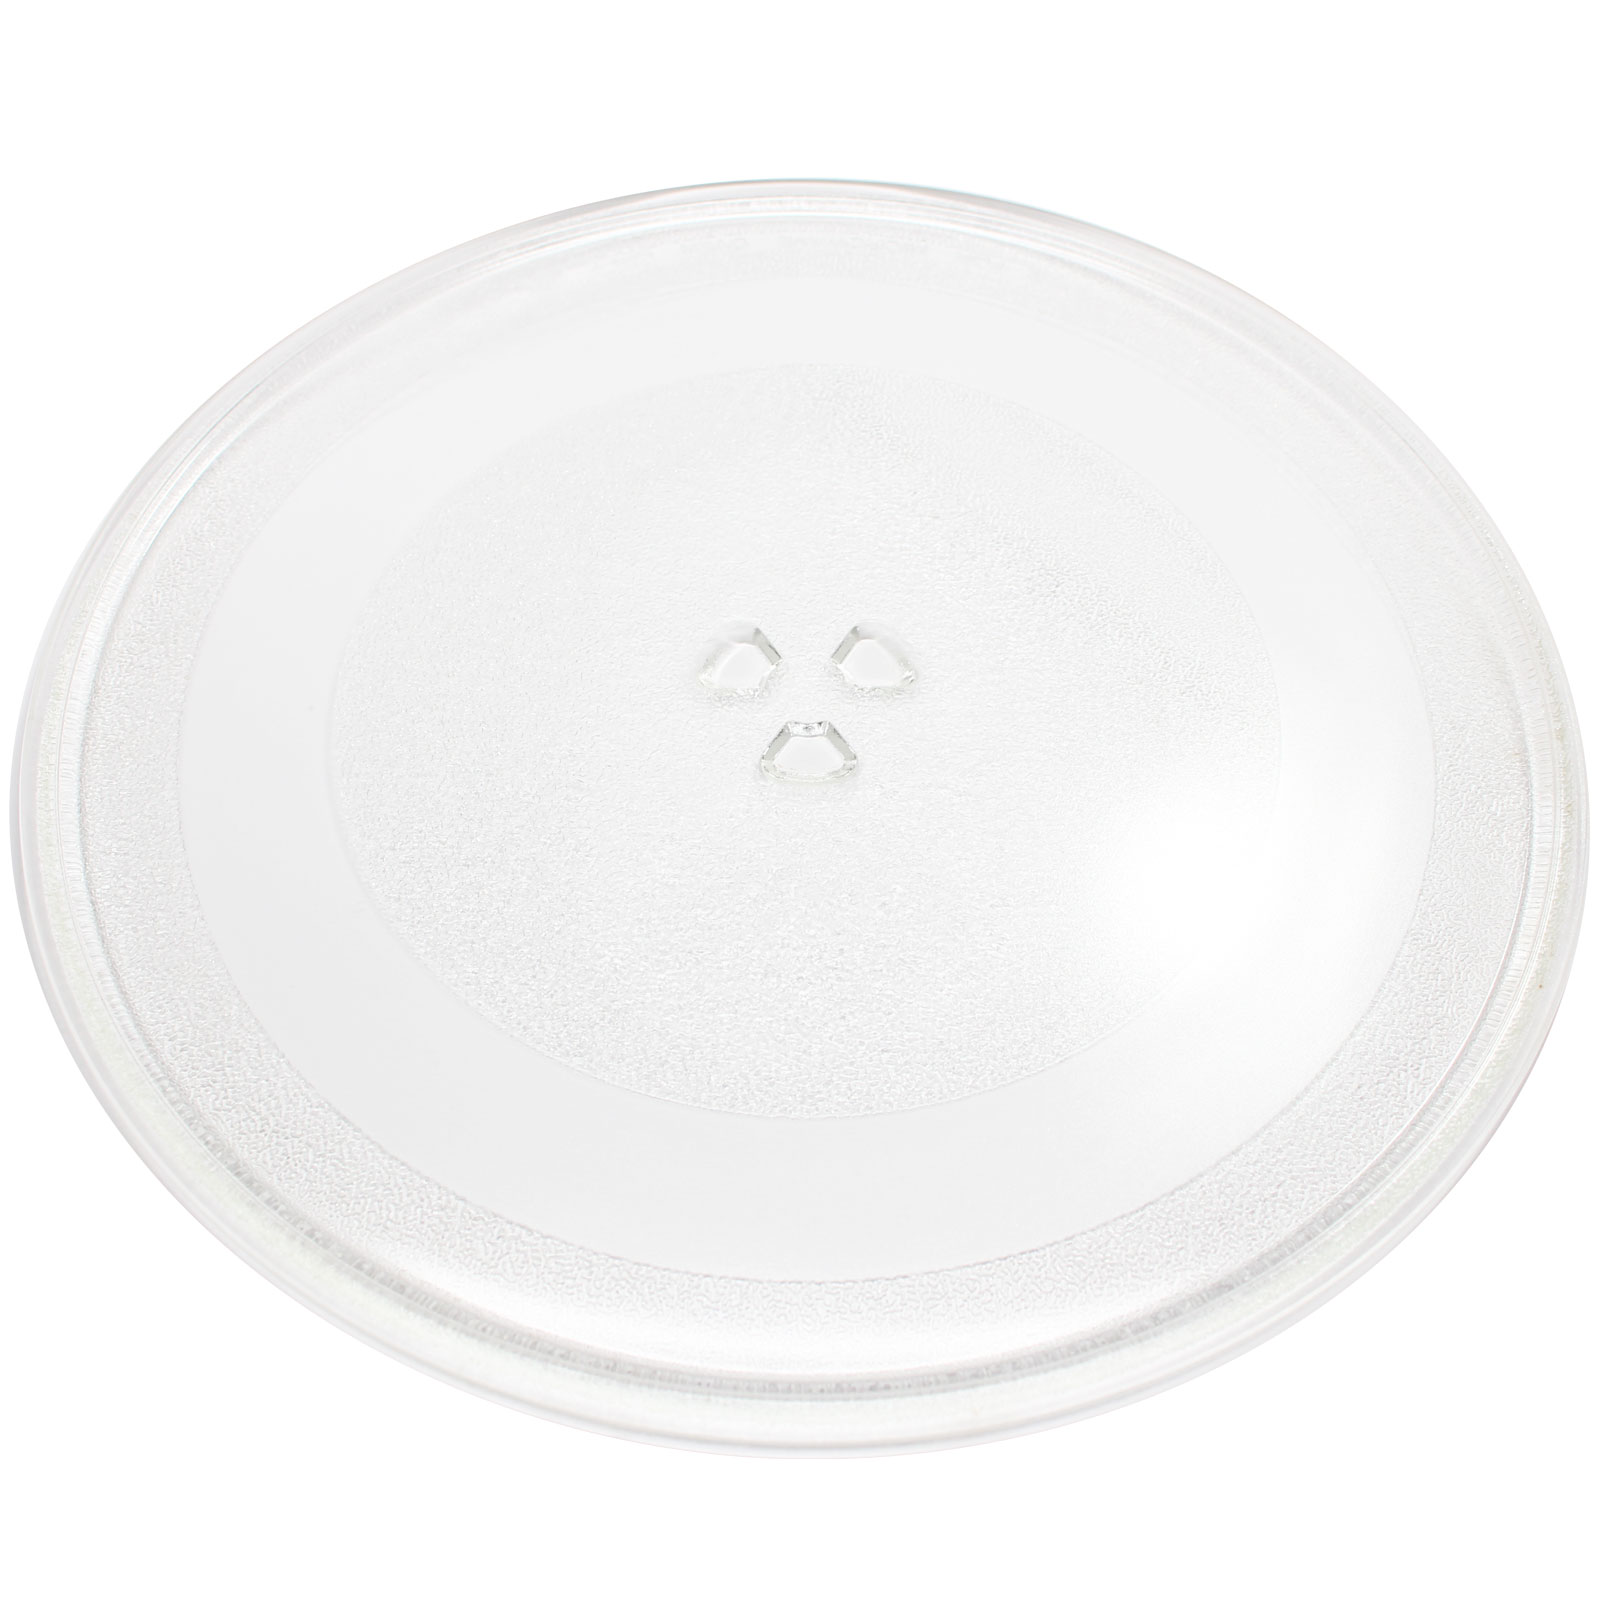 Replacement for Sears//Kenmore 72180829500 Microwave Glass Plate 345mm 13 1//2 Compatible with Sears//Kenmore 3390W1A019 Microwave Glass Turntable Tray